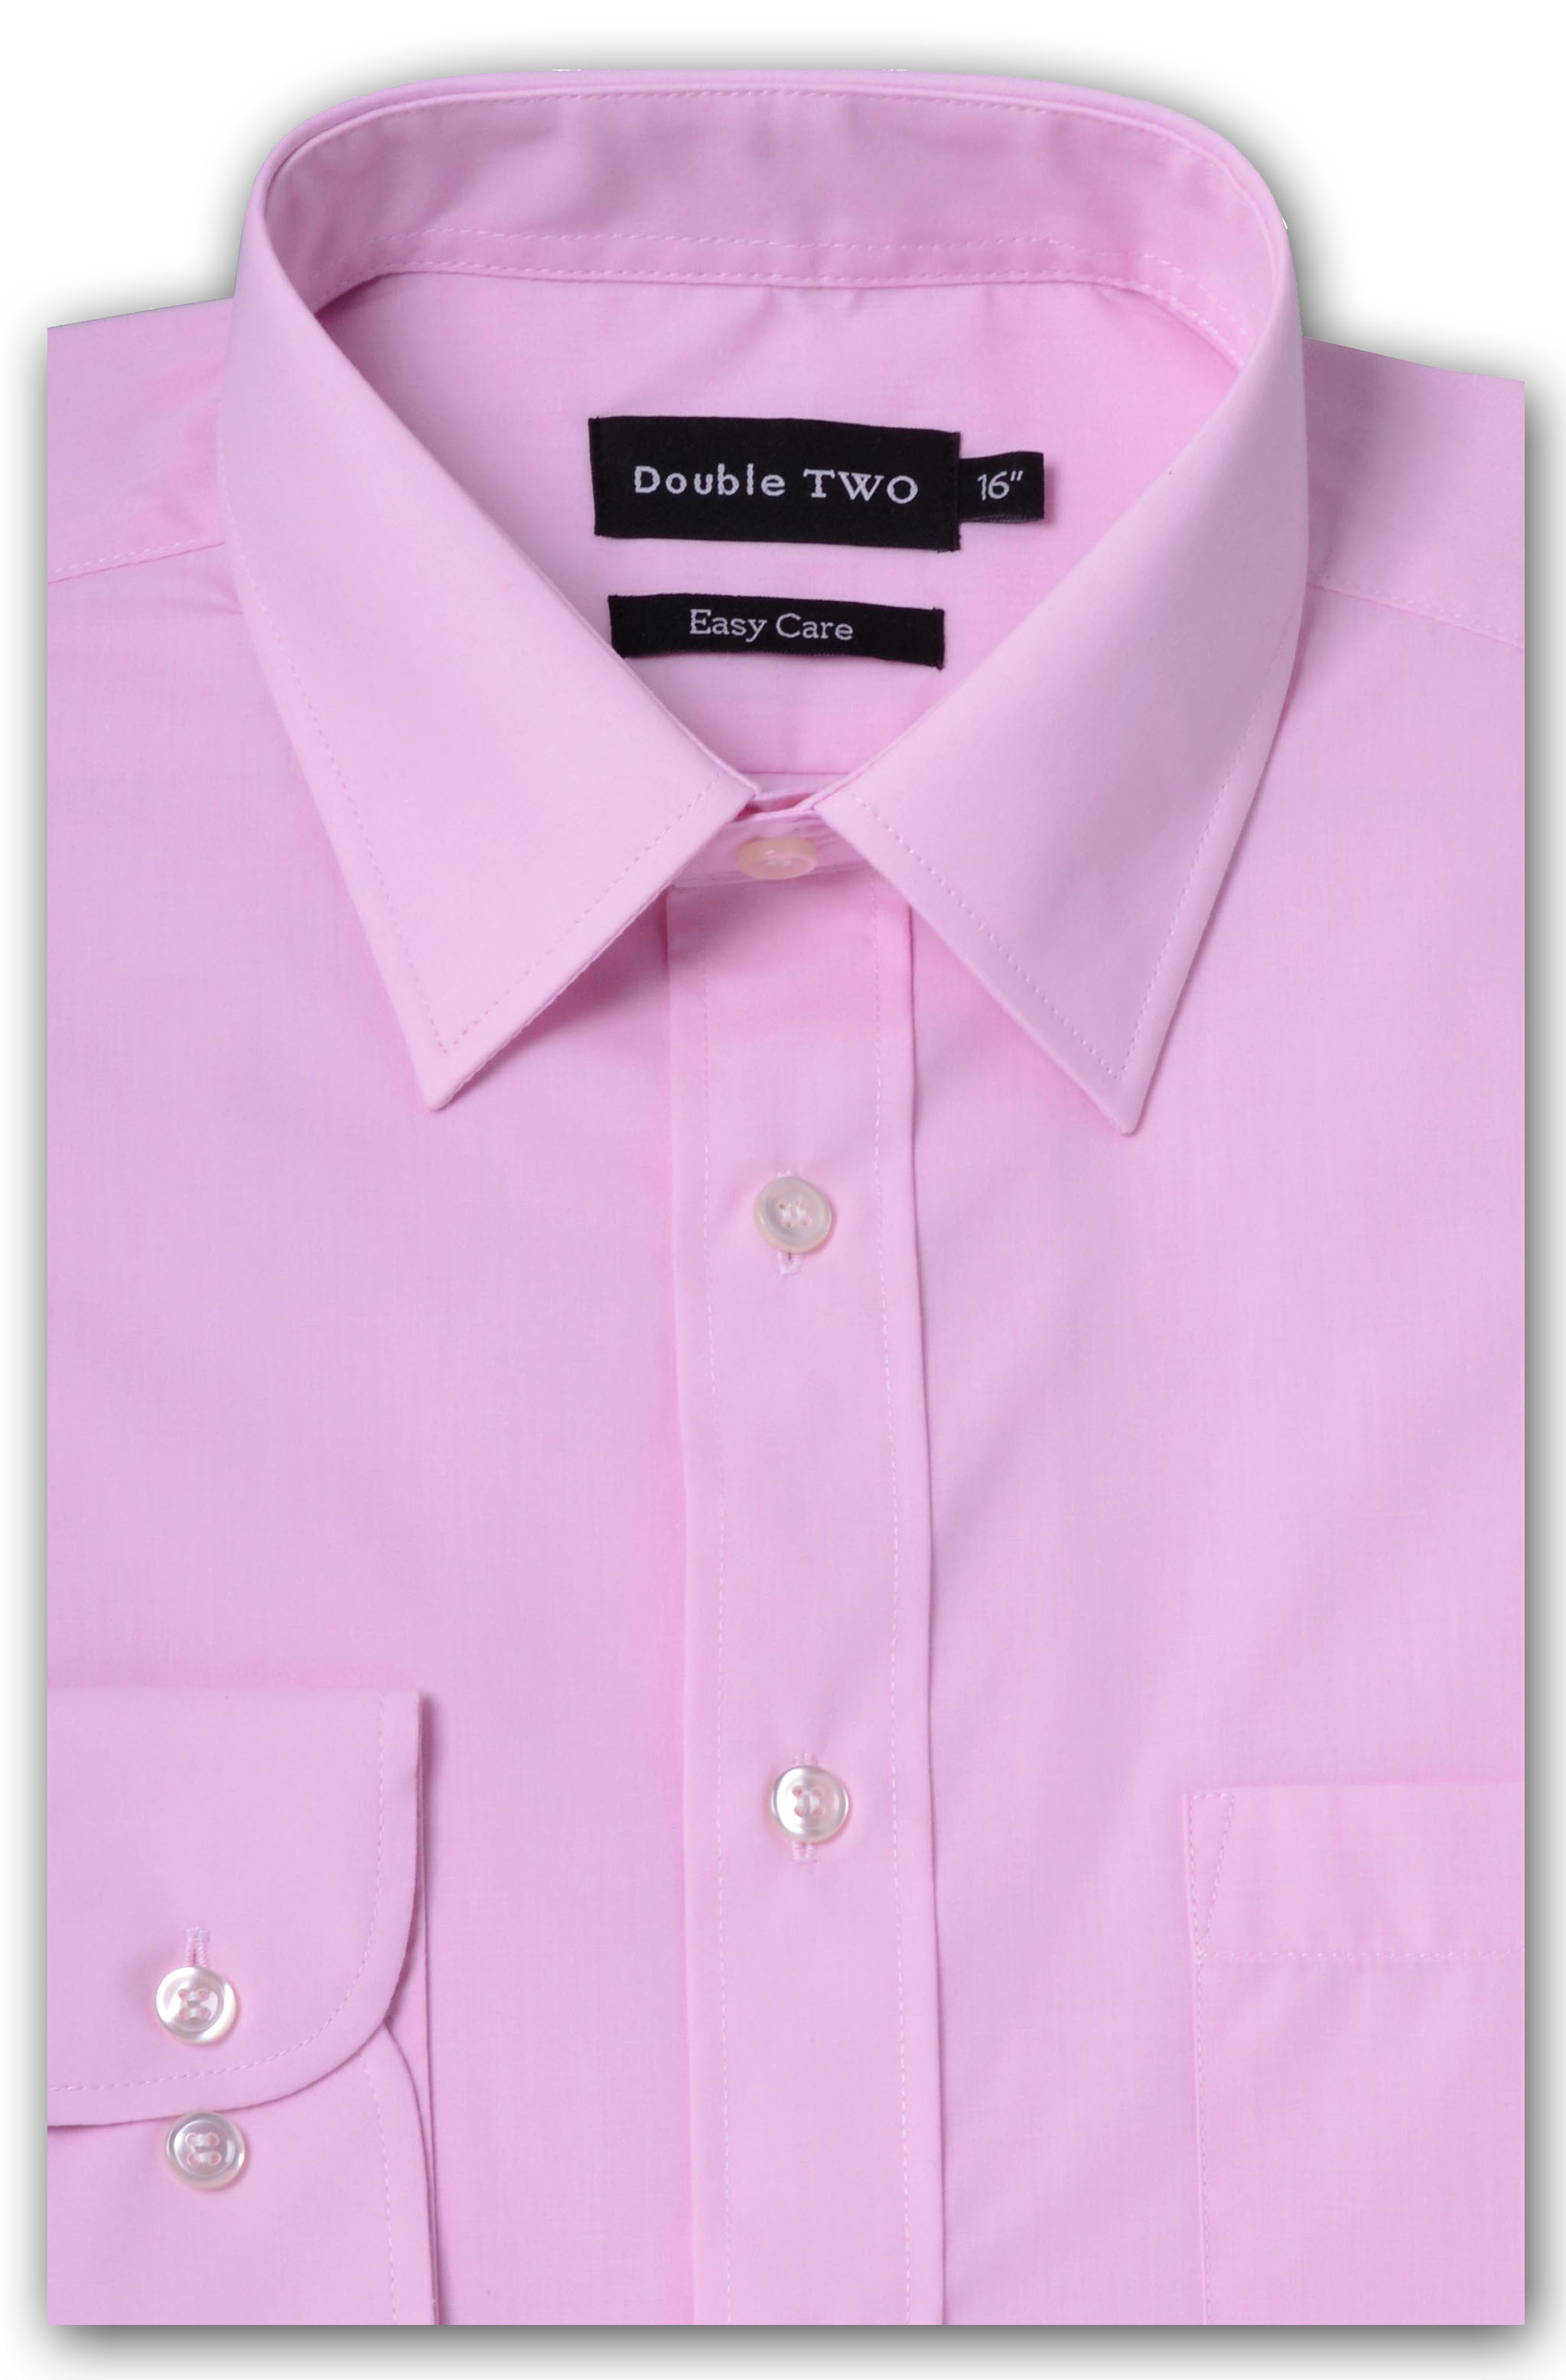 Double Two – Mens Shirts – Plus & Minors